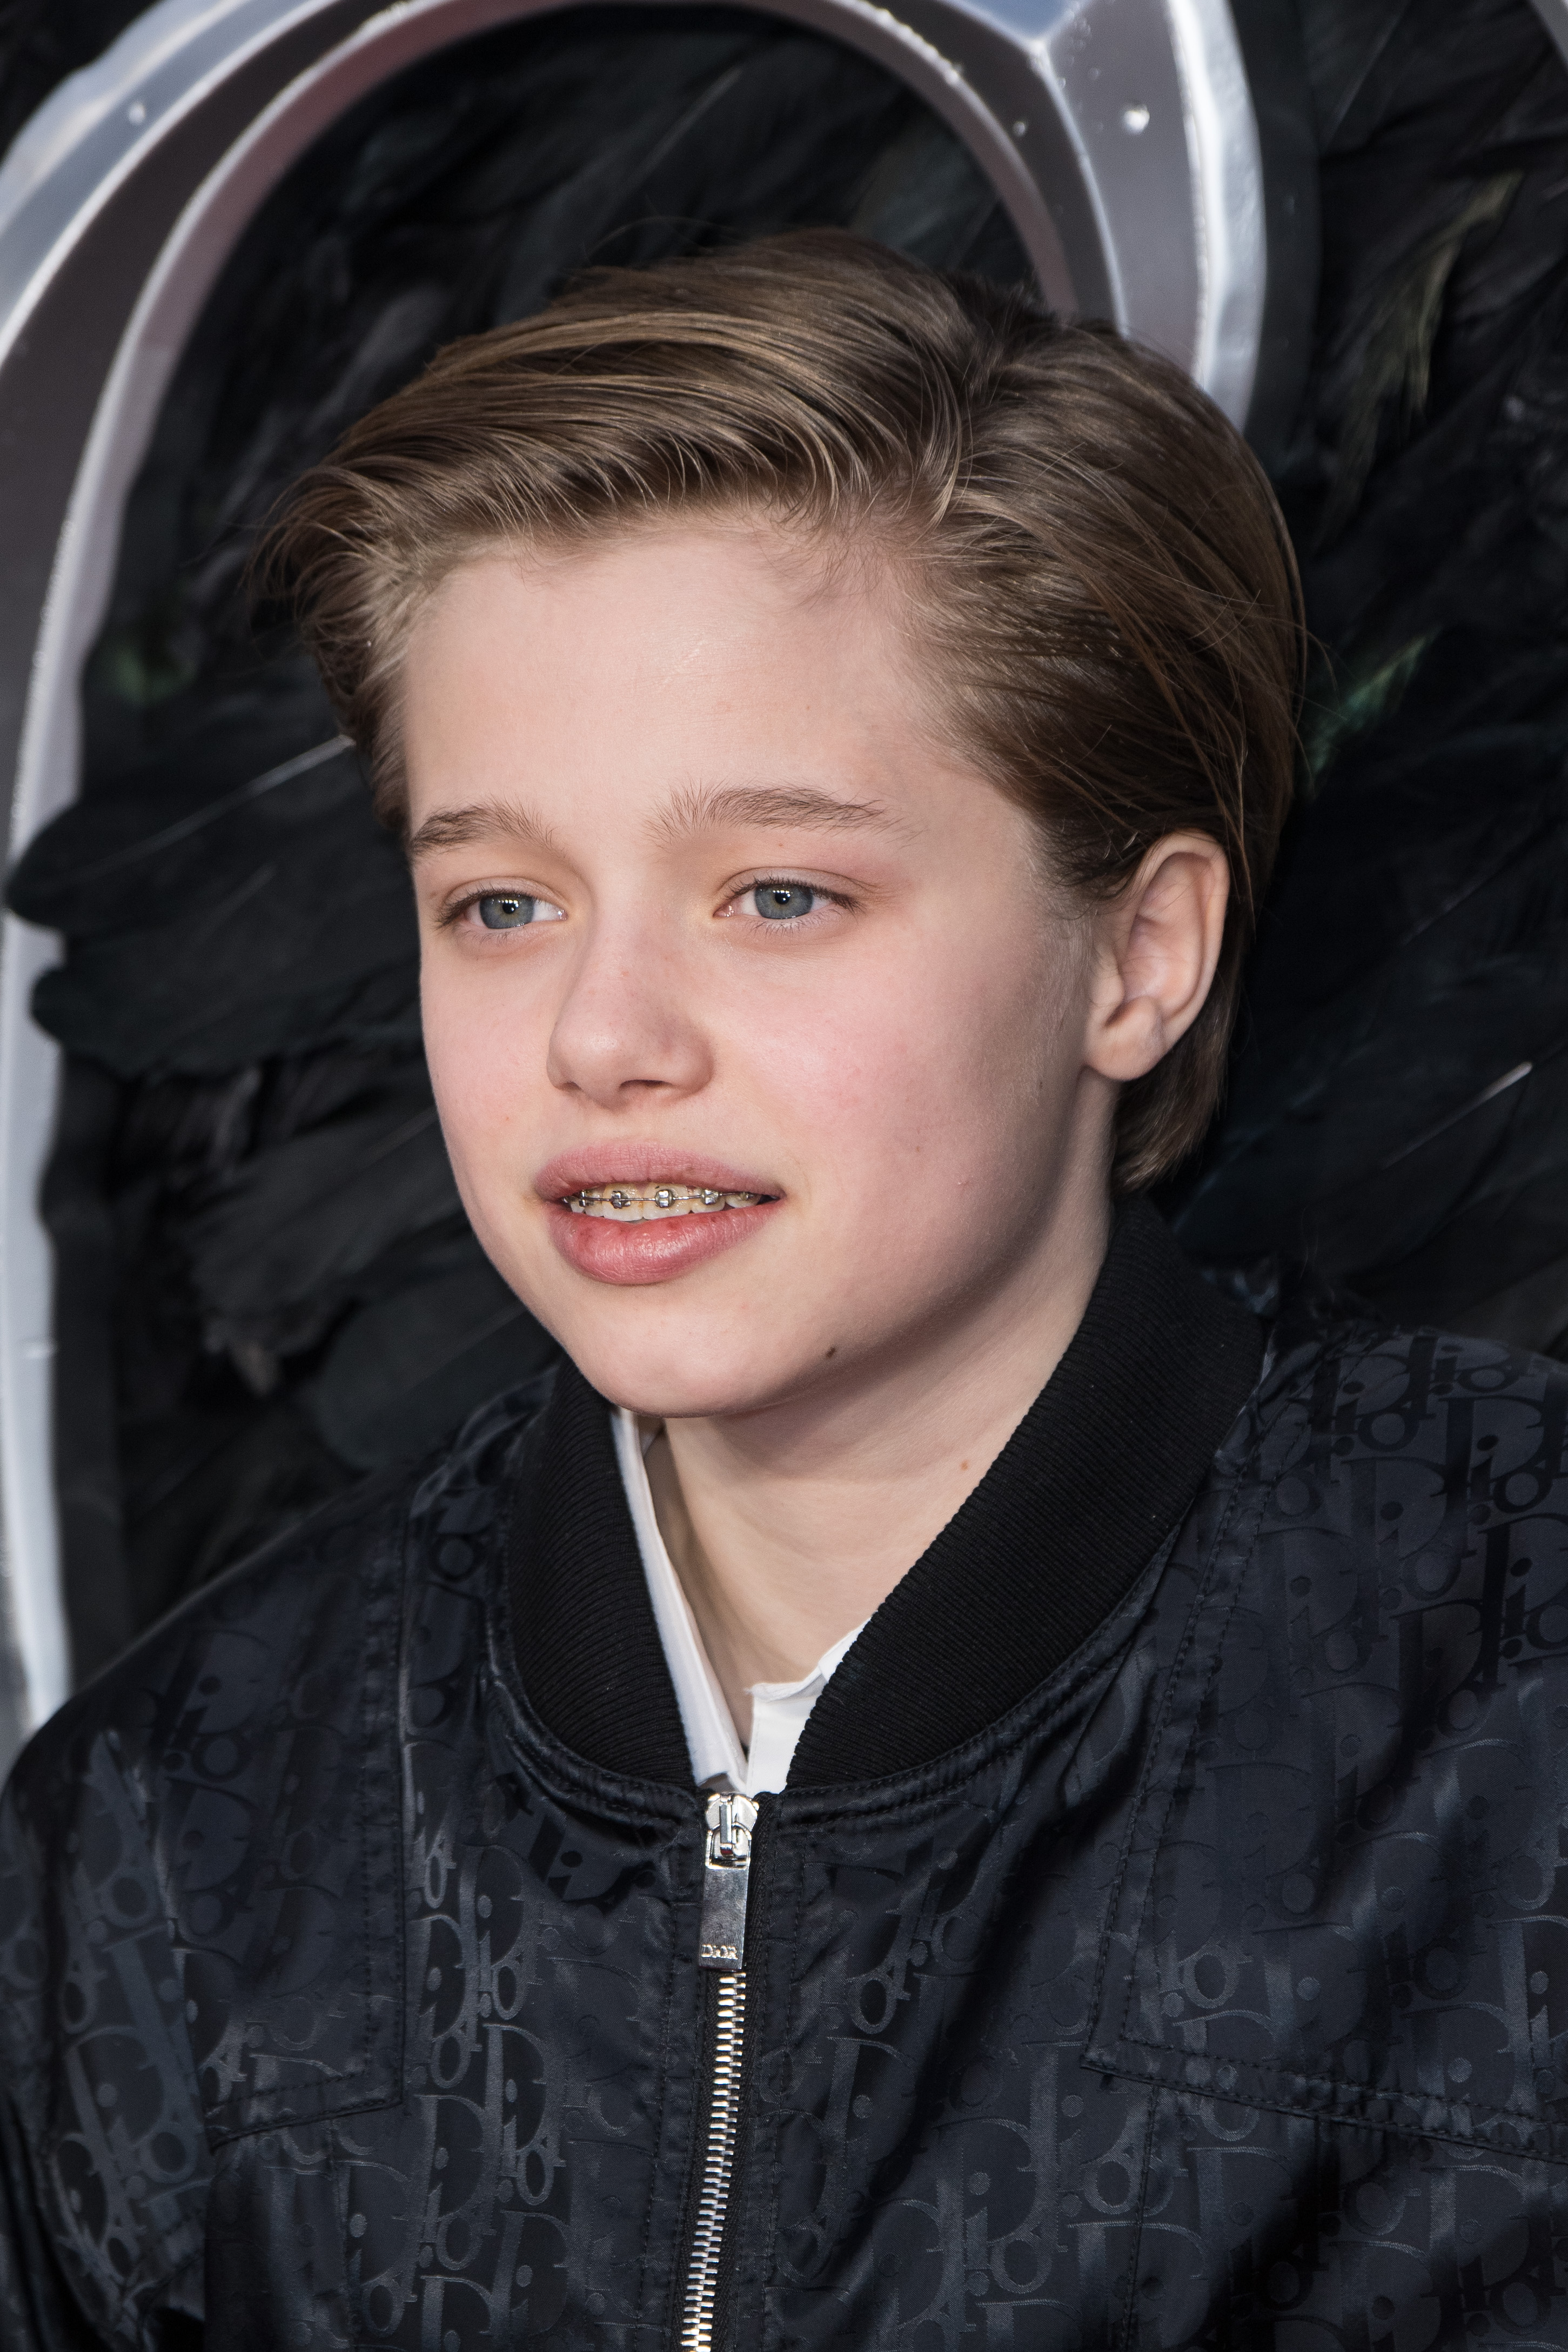 Shiloh Nouvel Jolie-Pitt  at the "Maleficent: Mistress of Evil" premiere in London in 2019 | Source: Getty Images